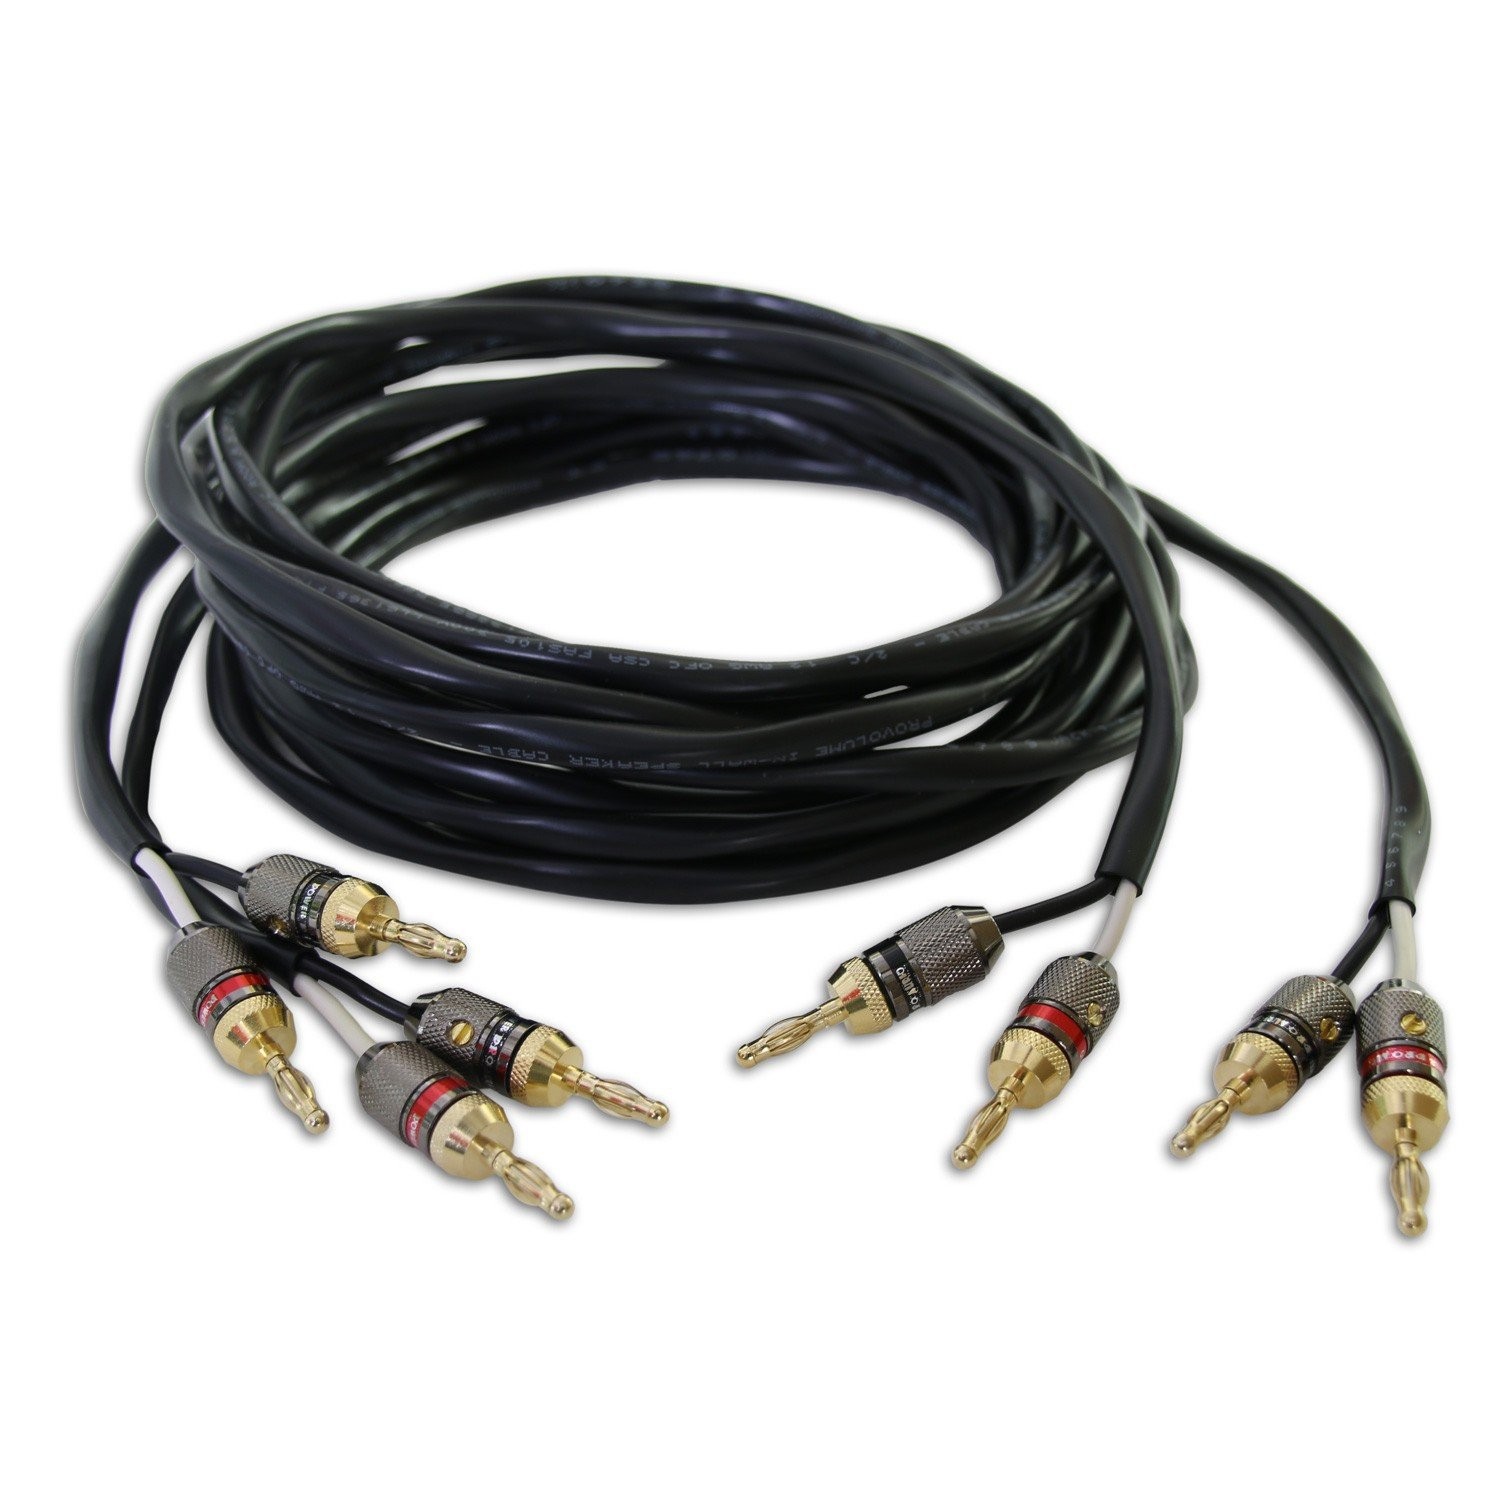 ThruSound HiFi-Series 12AWG 2-Conductor Speaker Wire with Premium 24k Gold-Plated Banana Plugs (40 Feet/Pair)